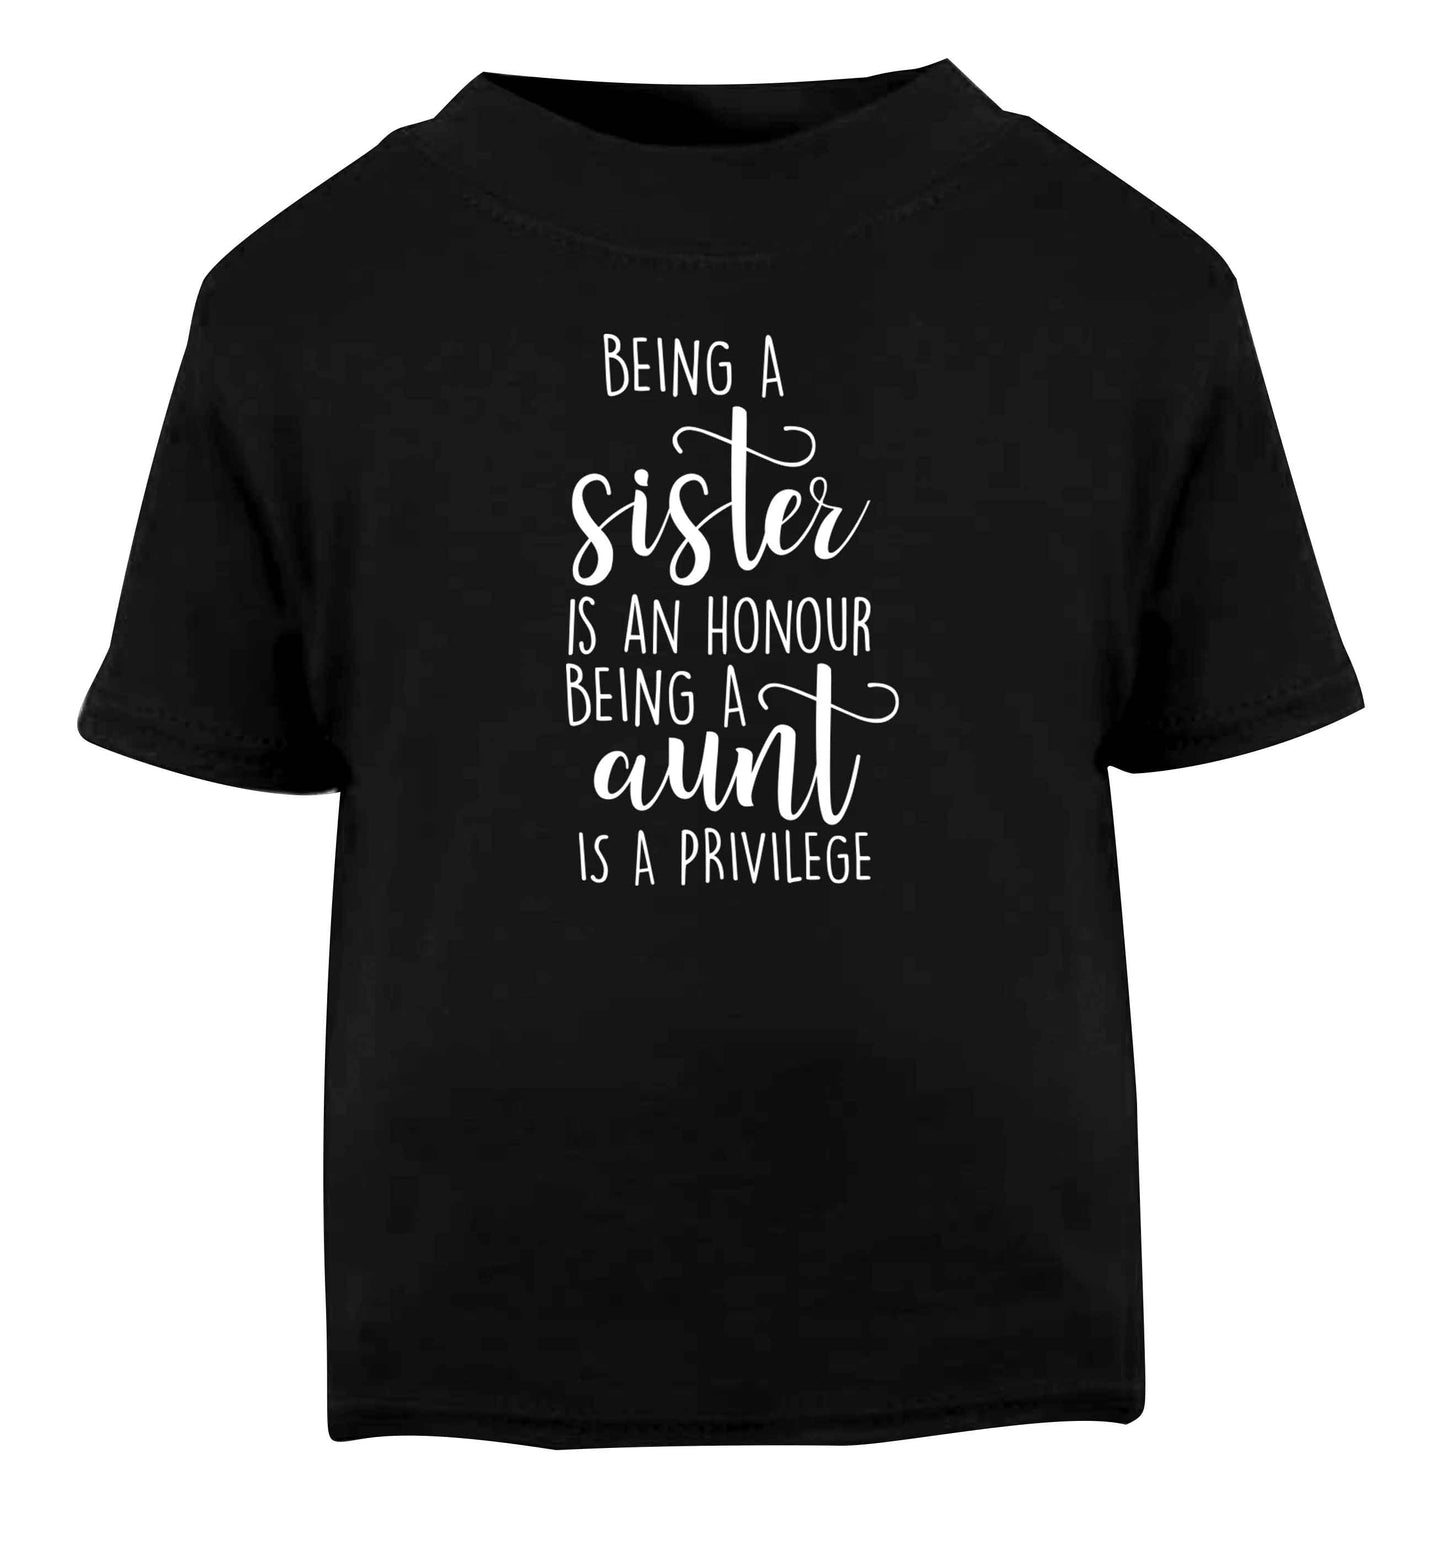 Being a sister is an honour being an auntie is a privilege Black Baby Toddler Tshirt 2 years